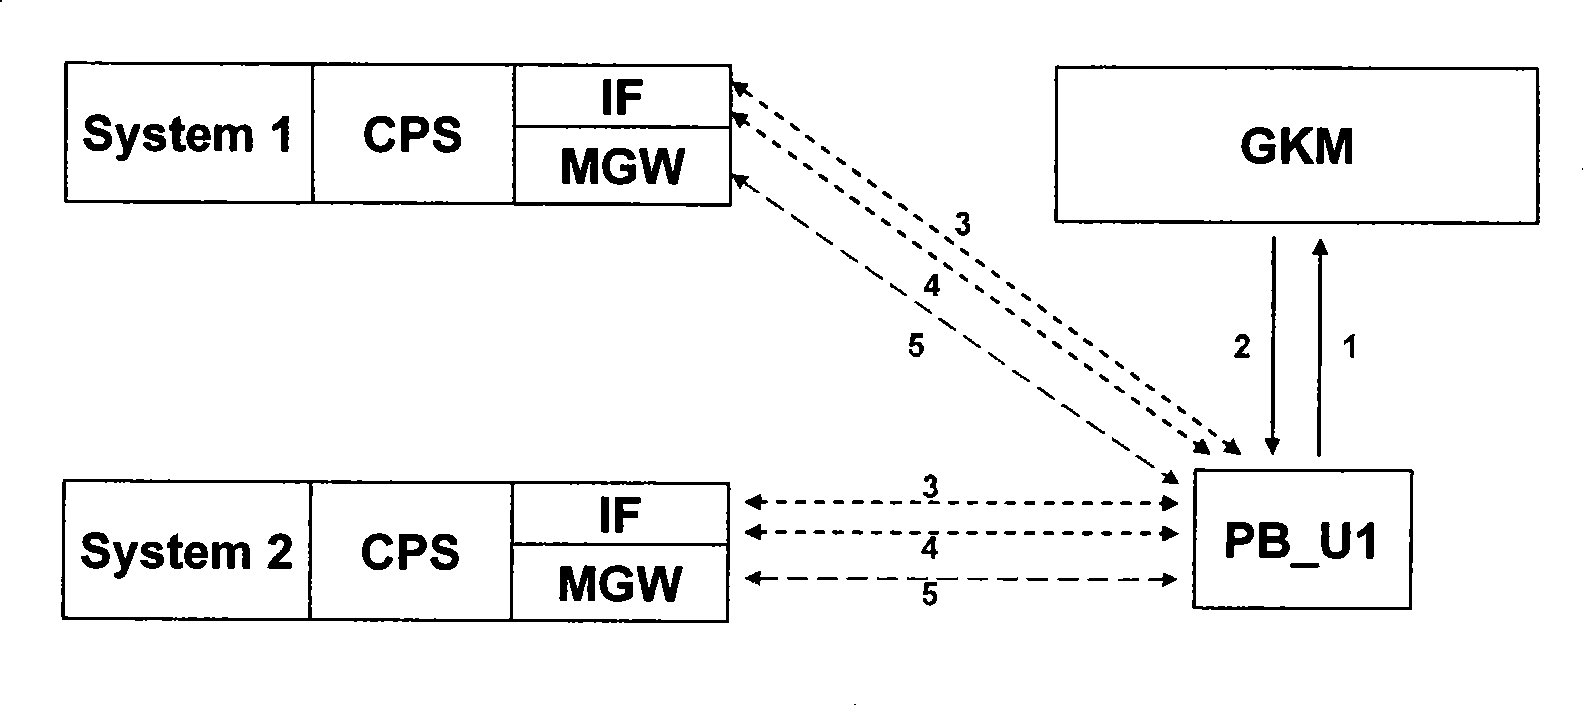 Method and system architecture for realizing service interconnection between multiple video monitoring platforms